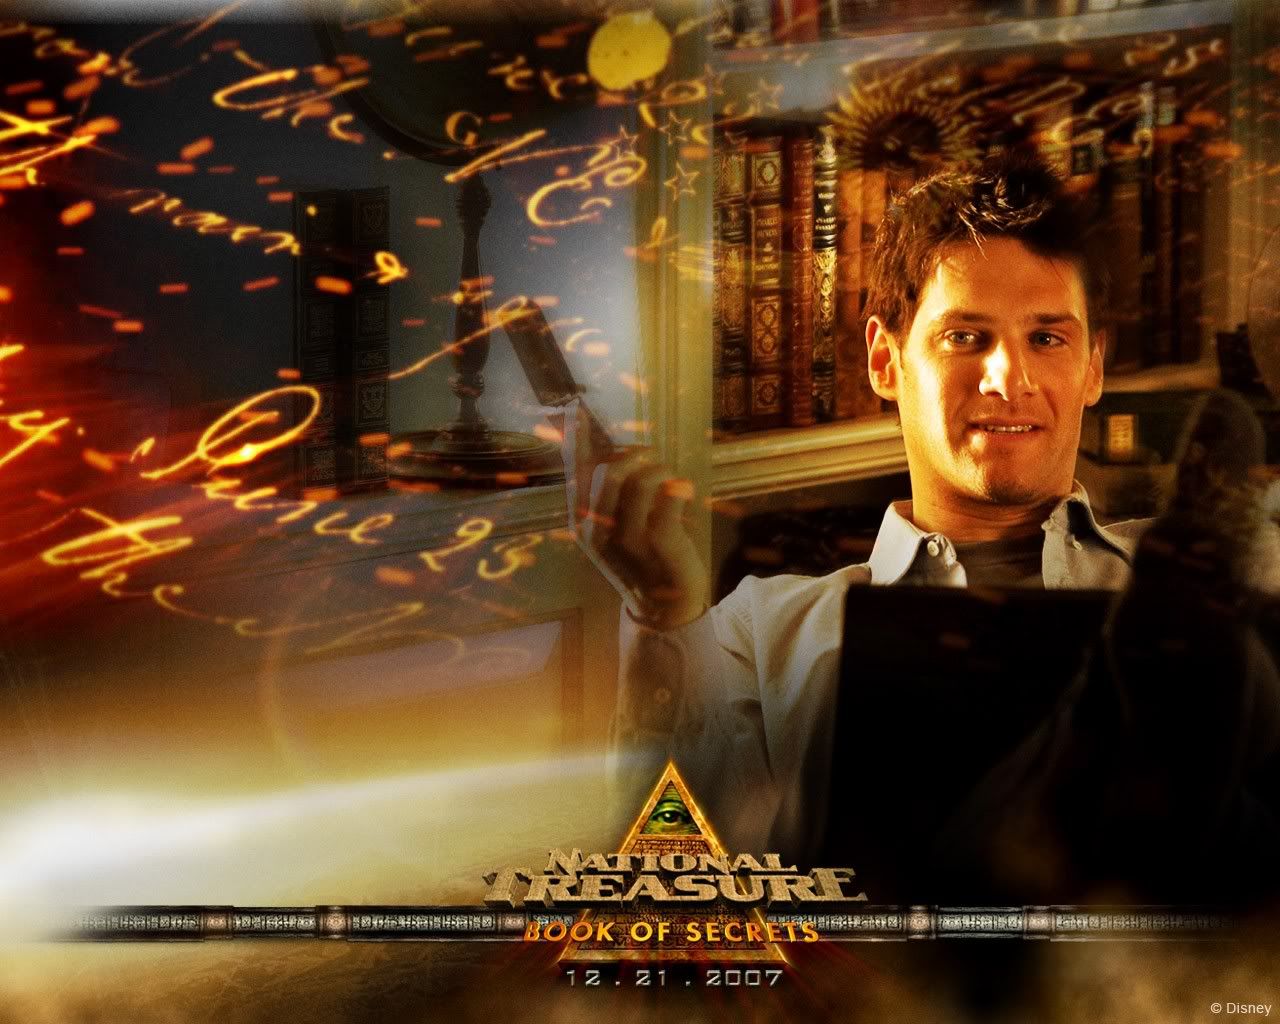 Moviewall - Movie Posters, Wallpapers & Trailers.: National Treasure: Book of Secrets.1280 x 1024